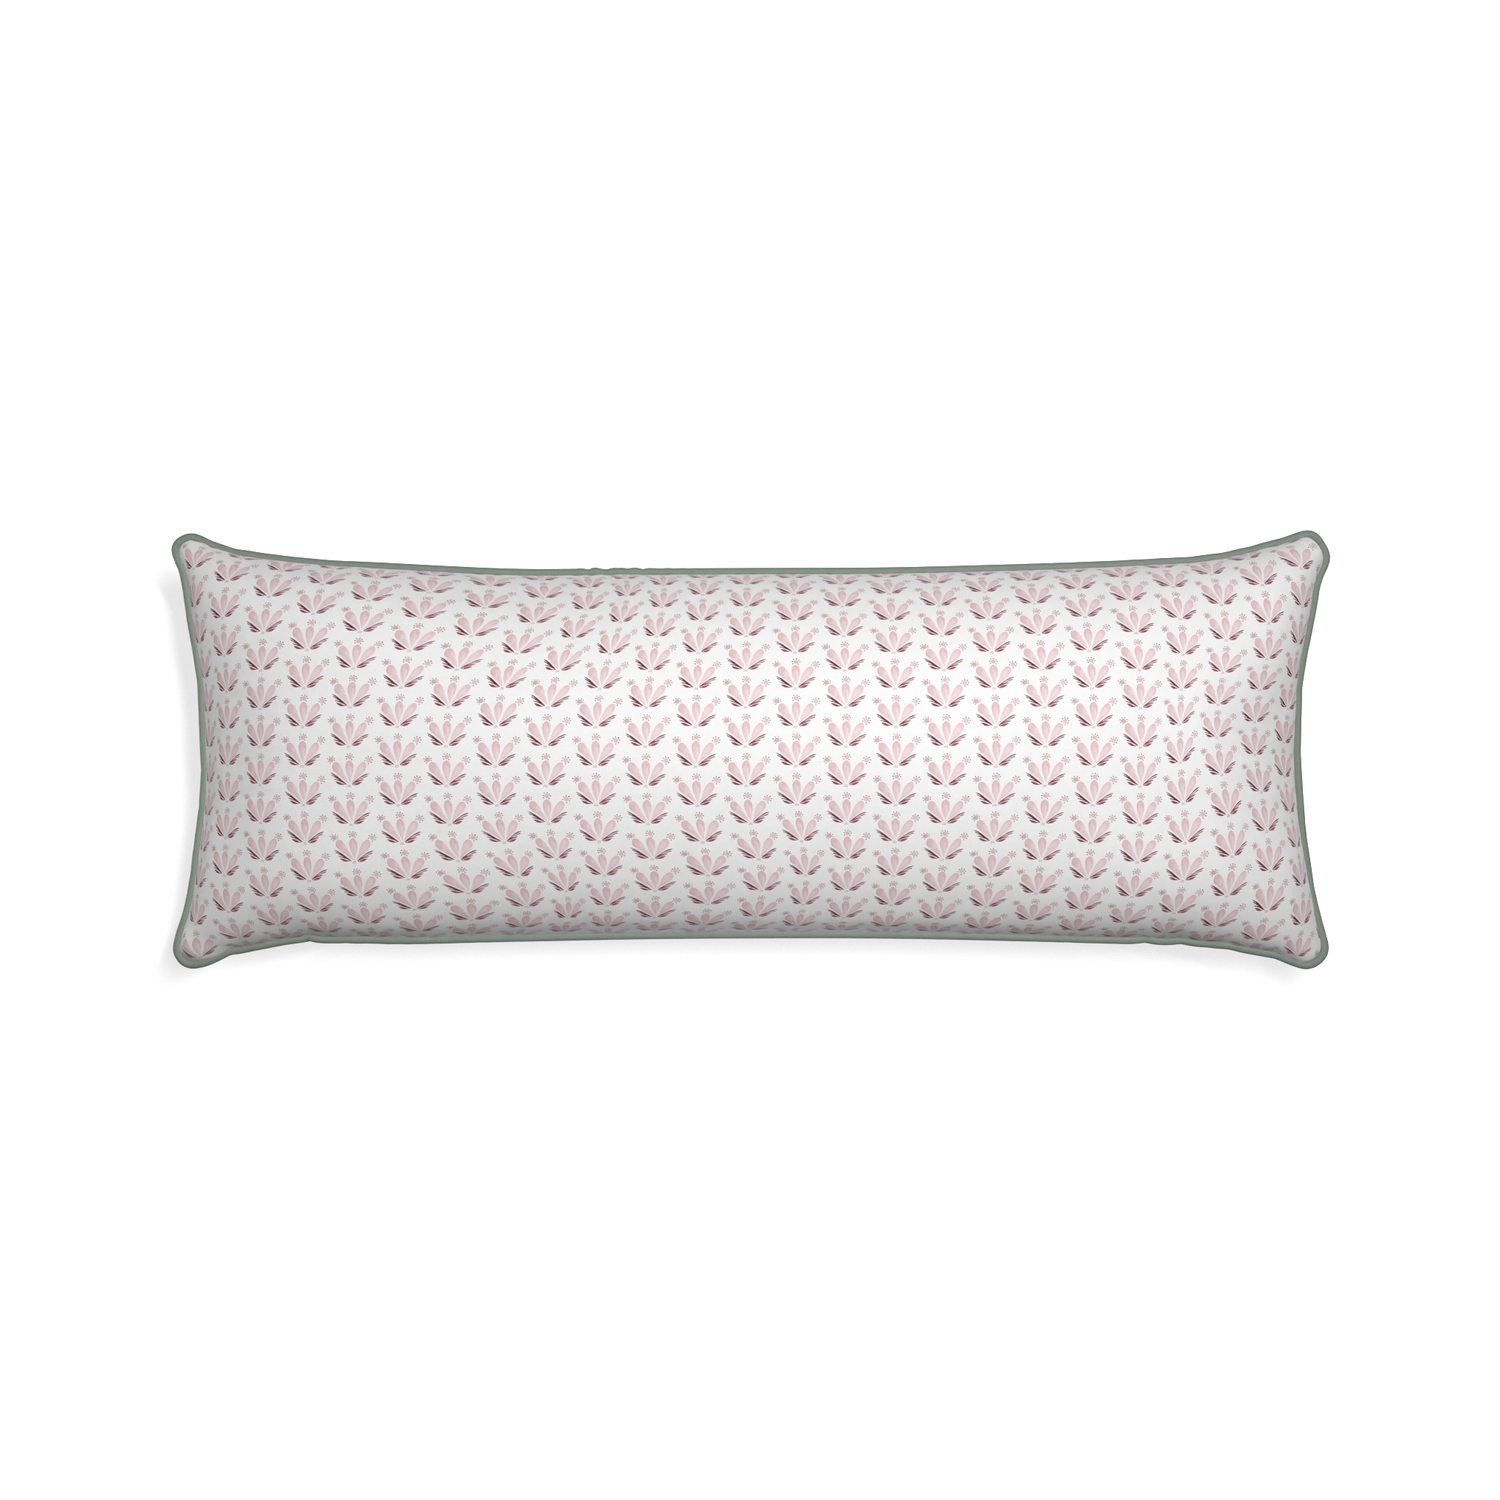 Xl-lumbar serena pink custom pink & burgundy drop repeat floralpillow with sage piping on white background